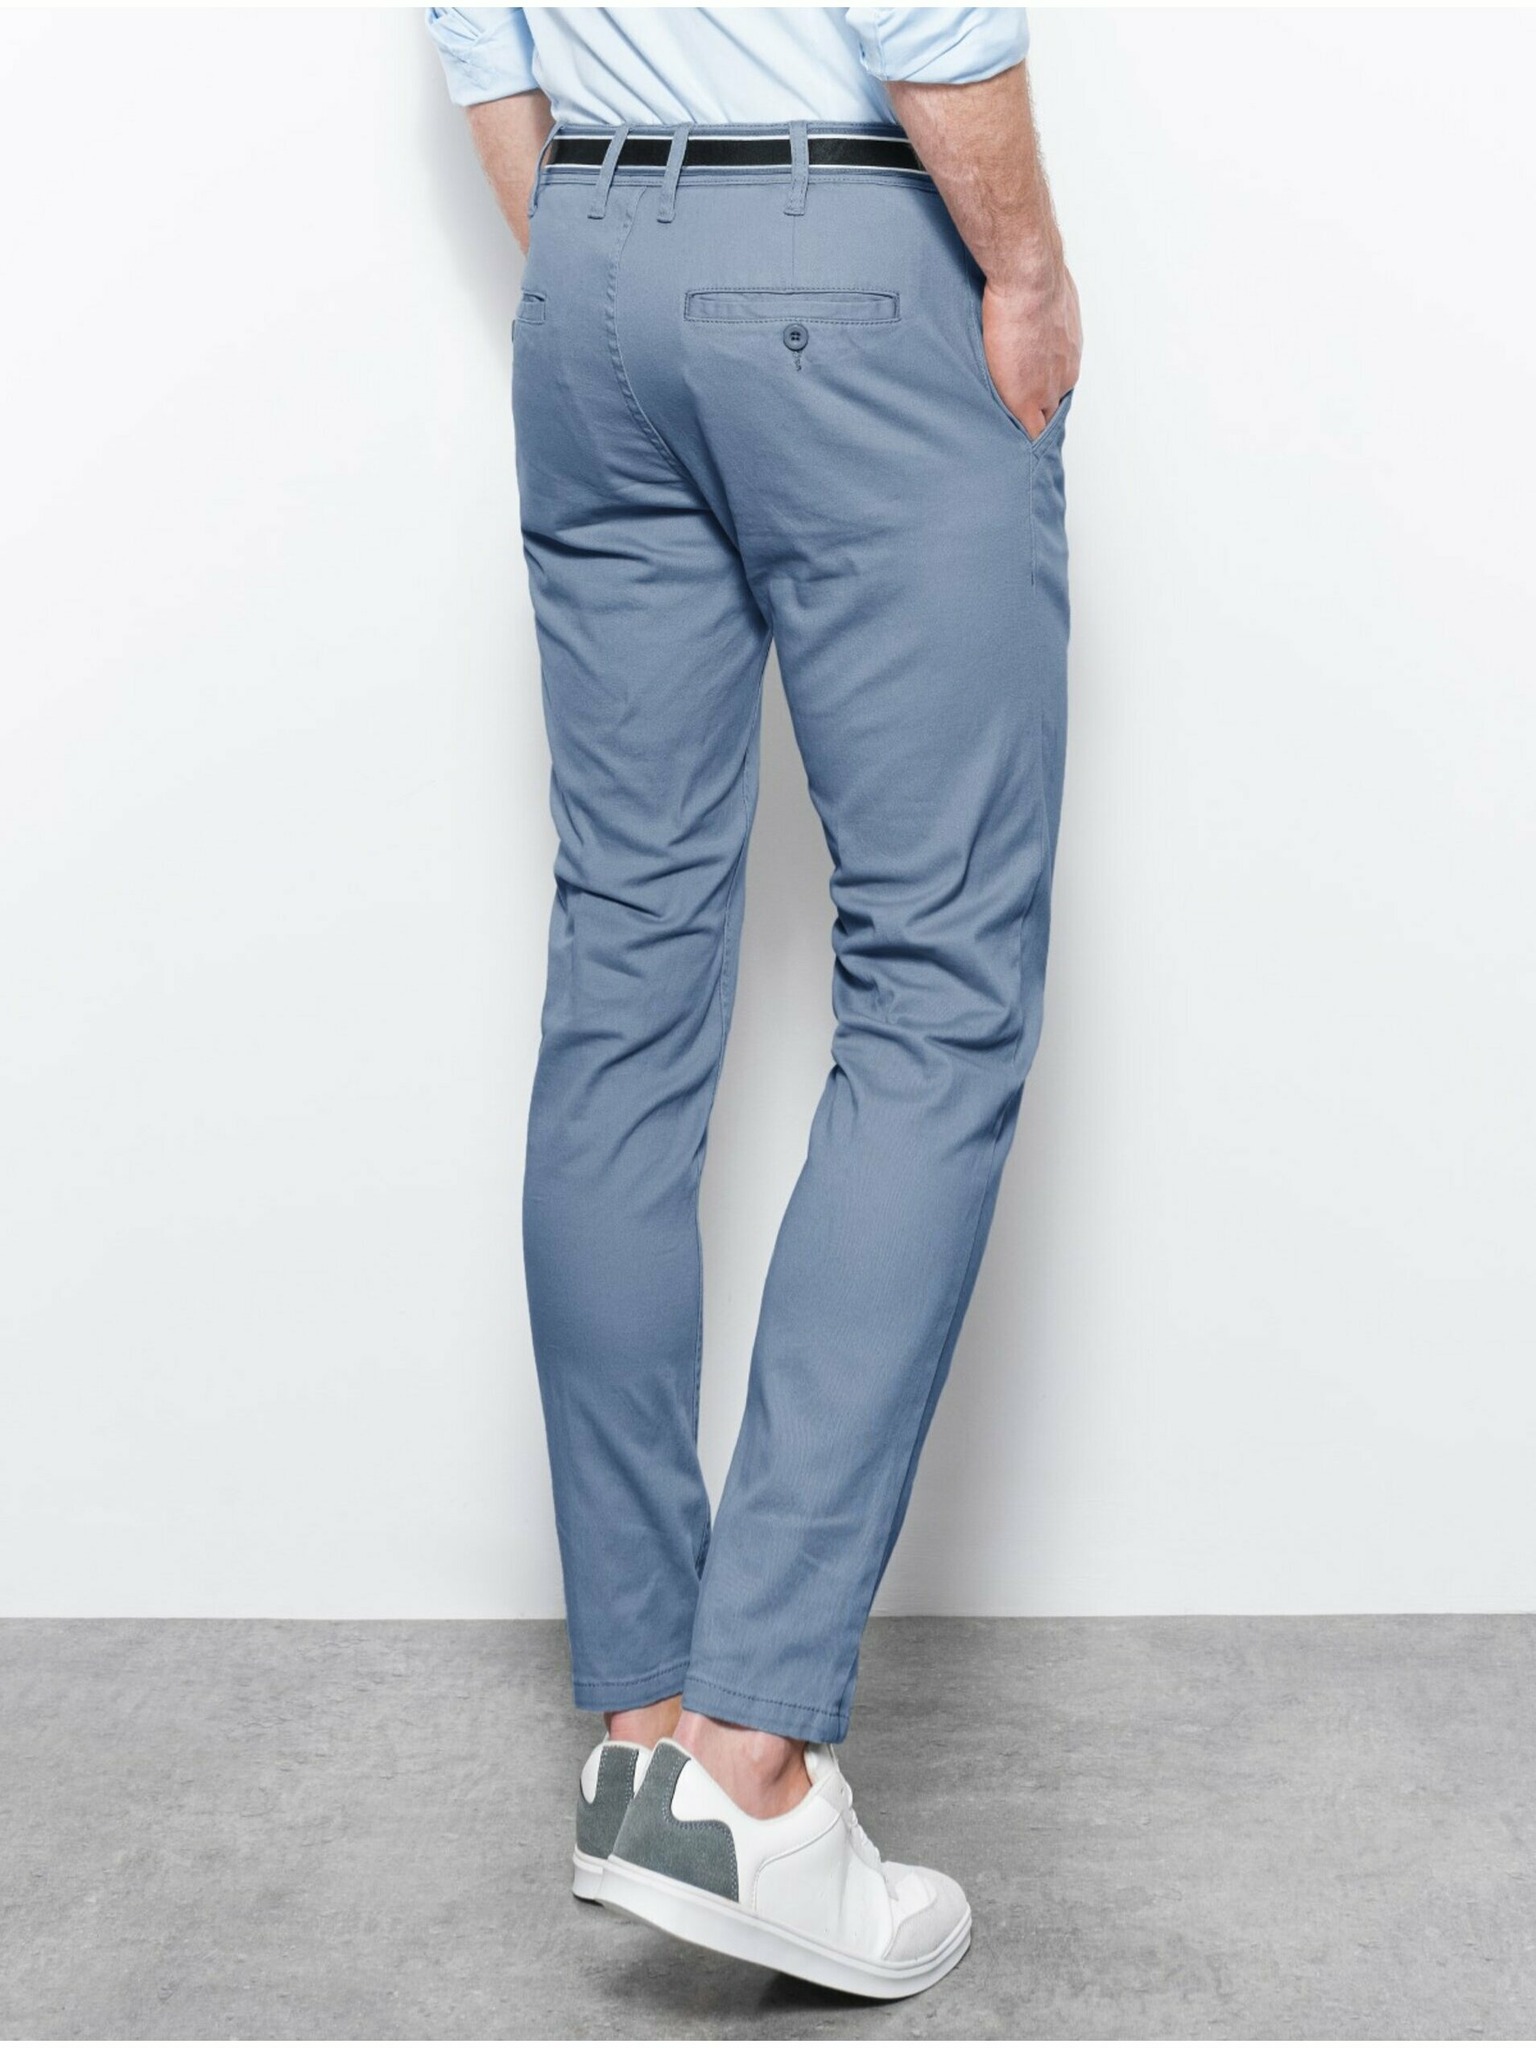 Buy AD by Arvind Men Blue Regular Fit Flat Front Casual Chinos - NNNOW.com